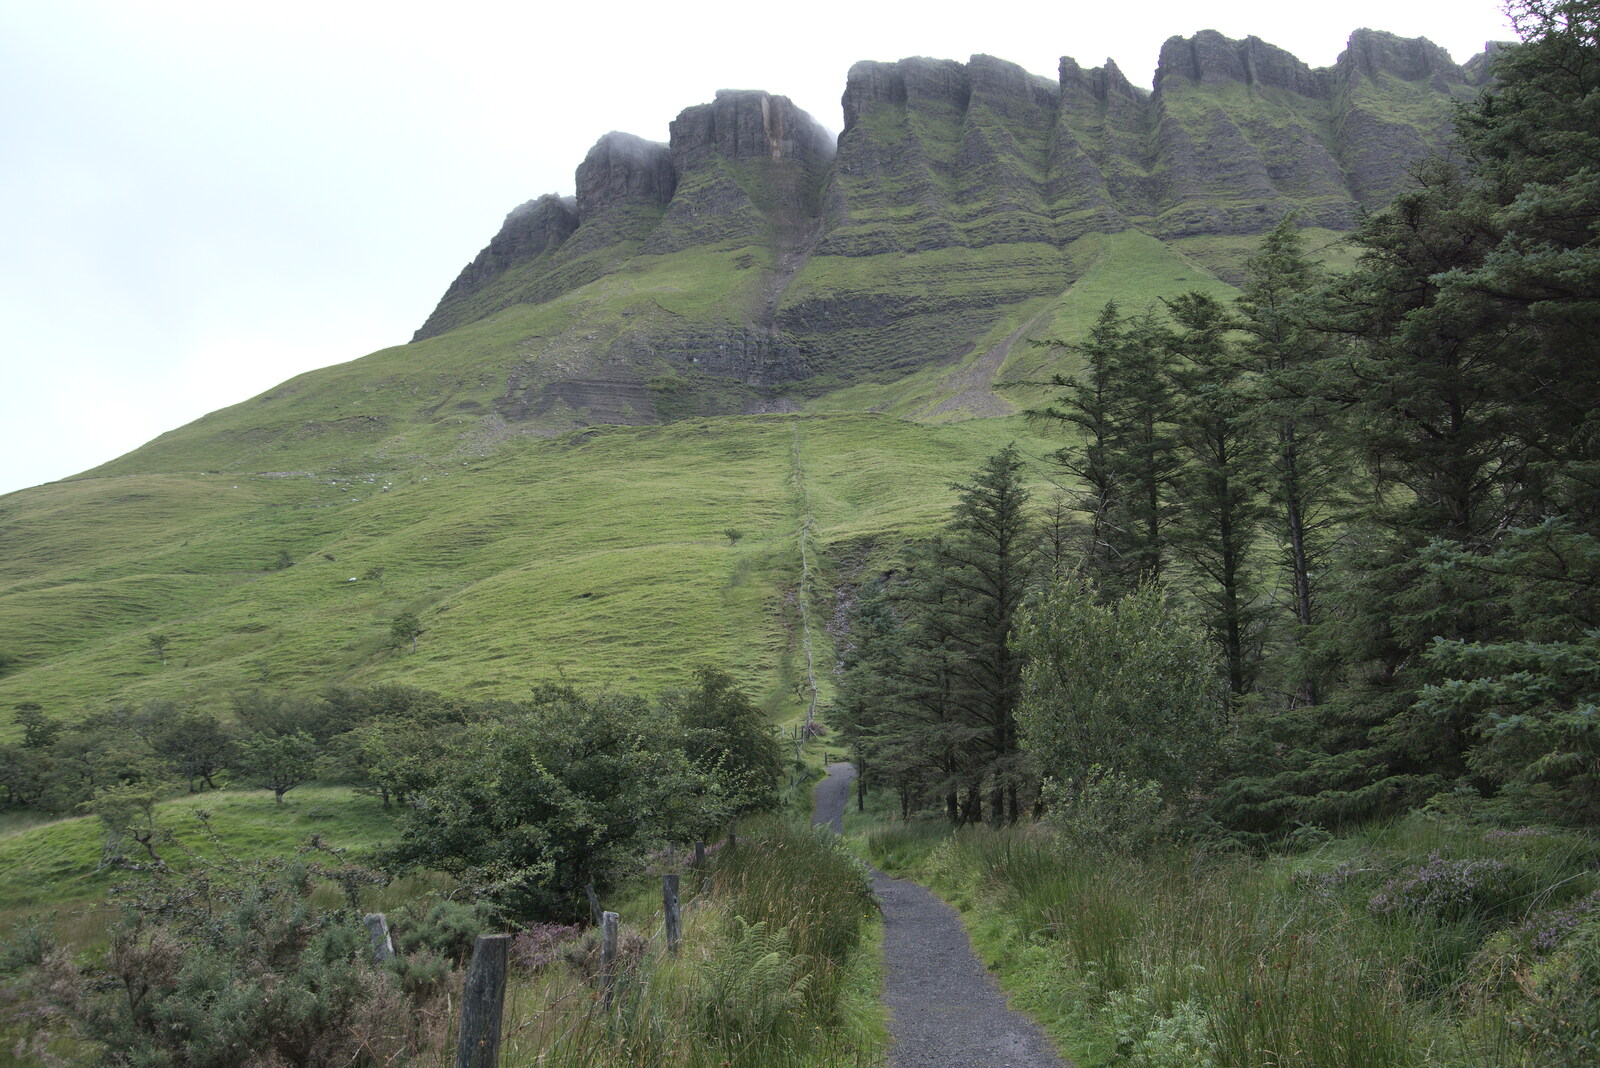 Looking back to Benbulben from Walks Around Benbulben and Carrowmore, County Sligo, Ireland - 13th August 2021